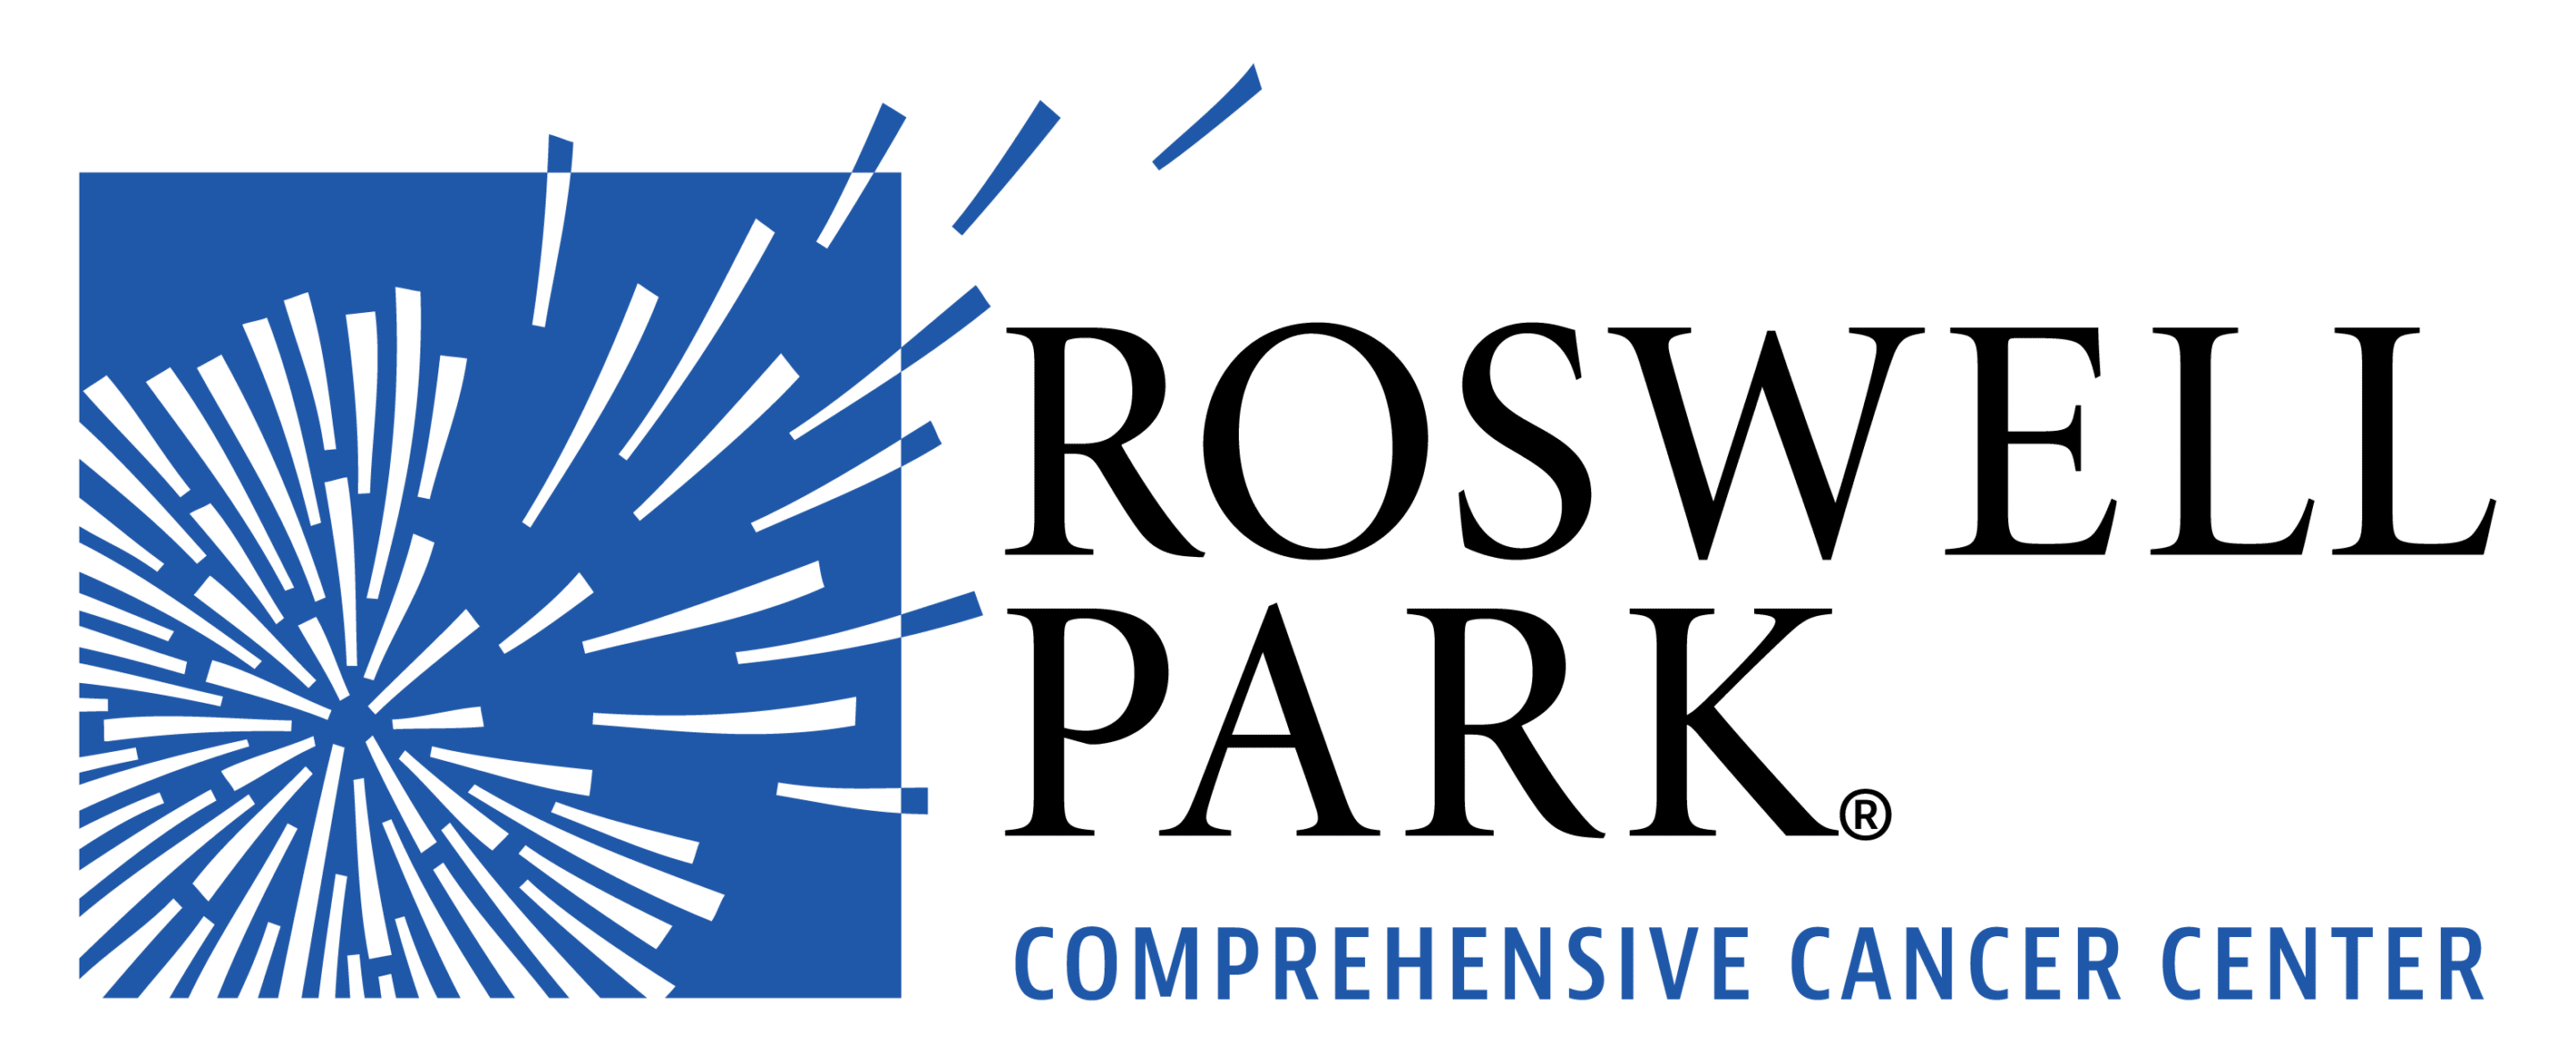 Corporate Sponsorship Page - roswell park logo